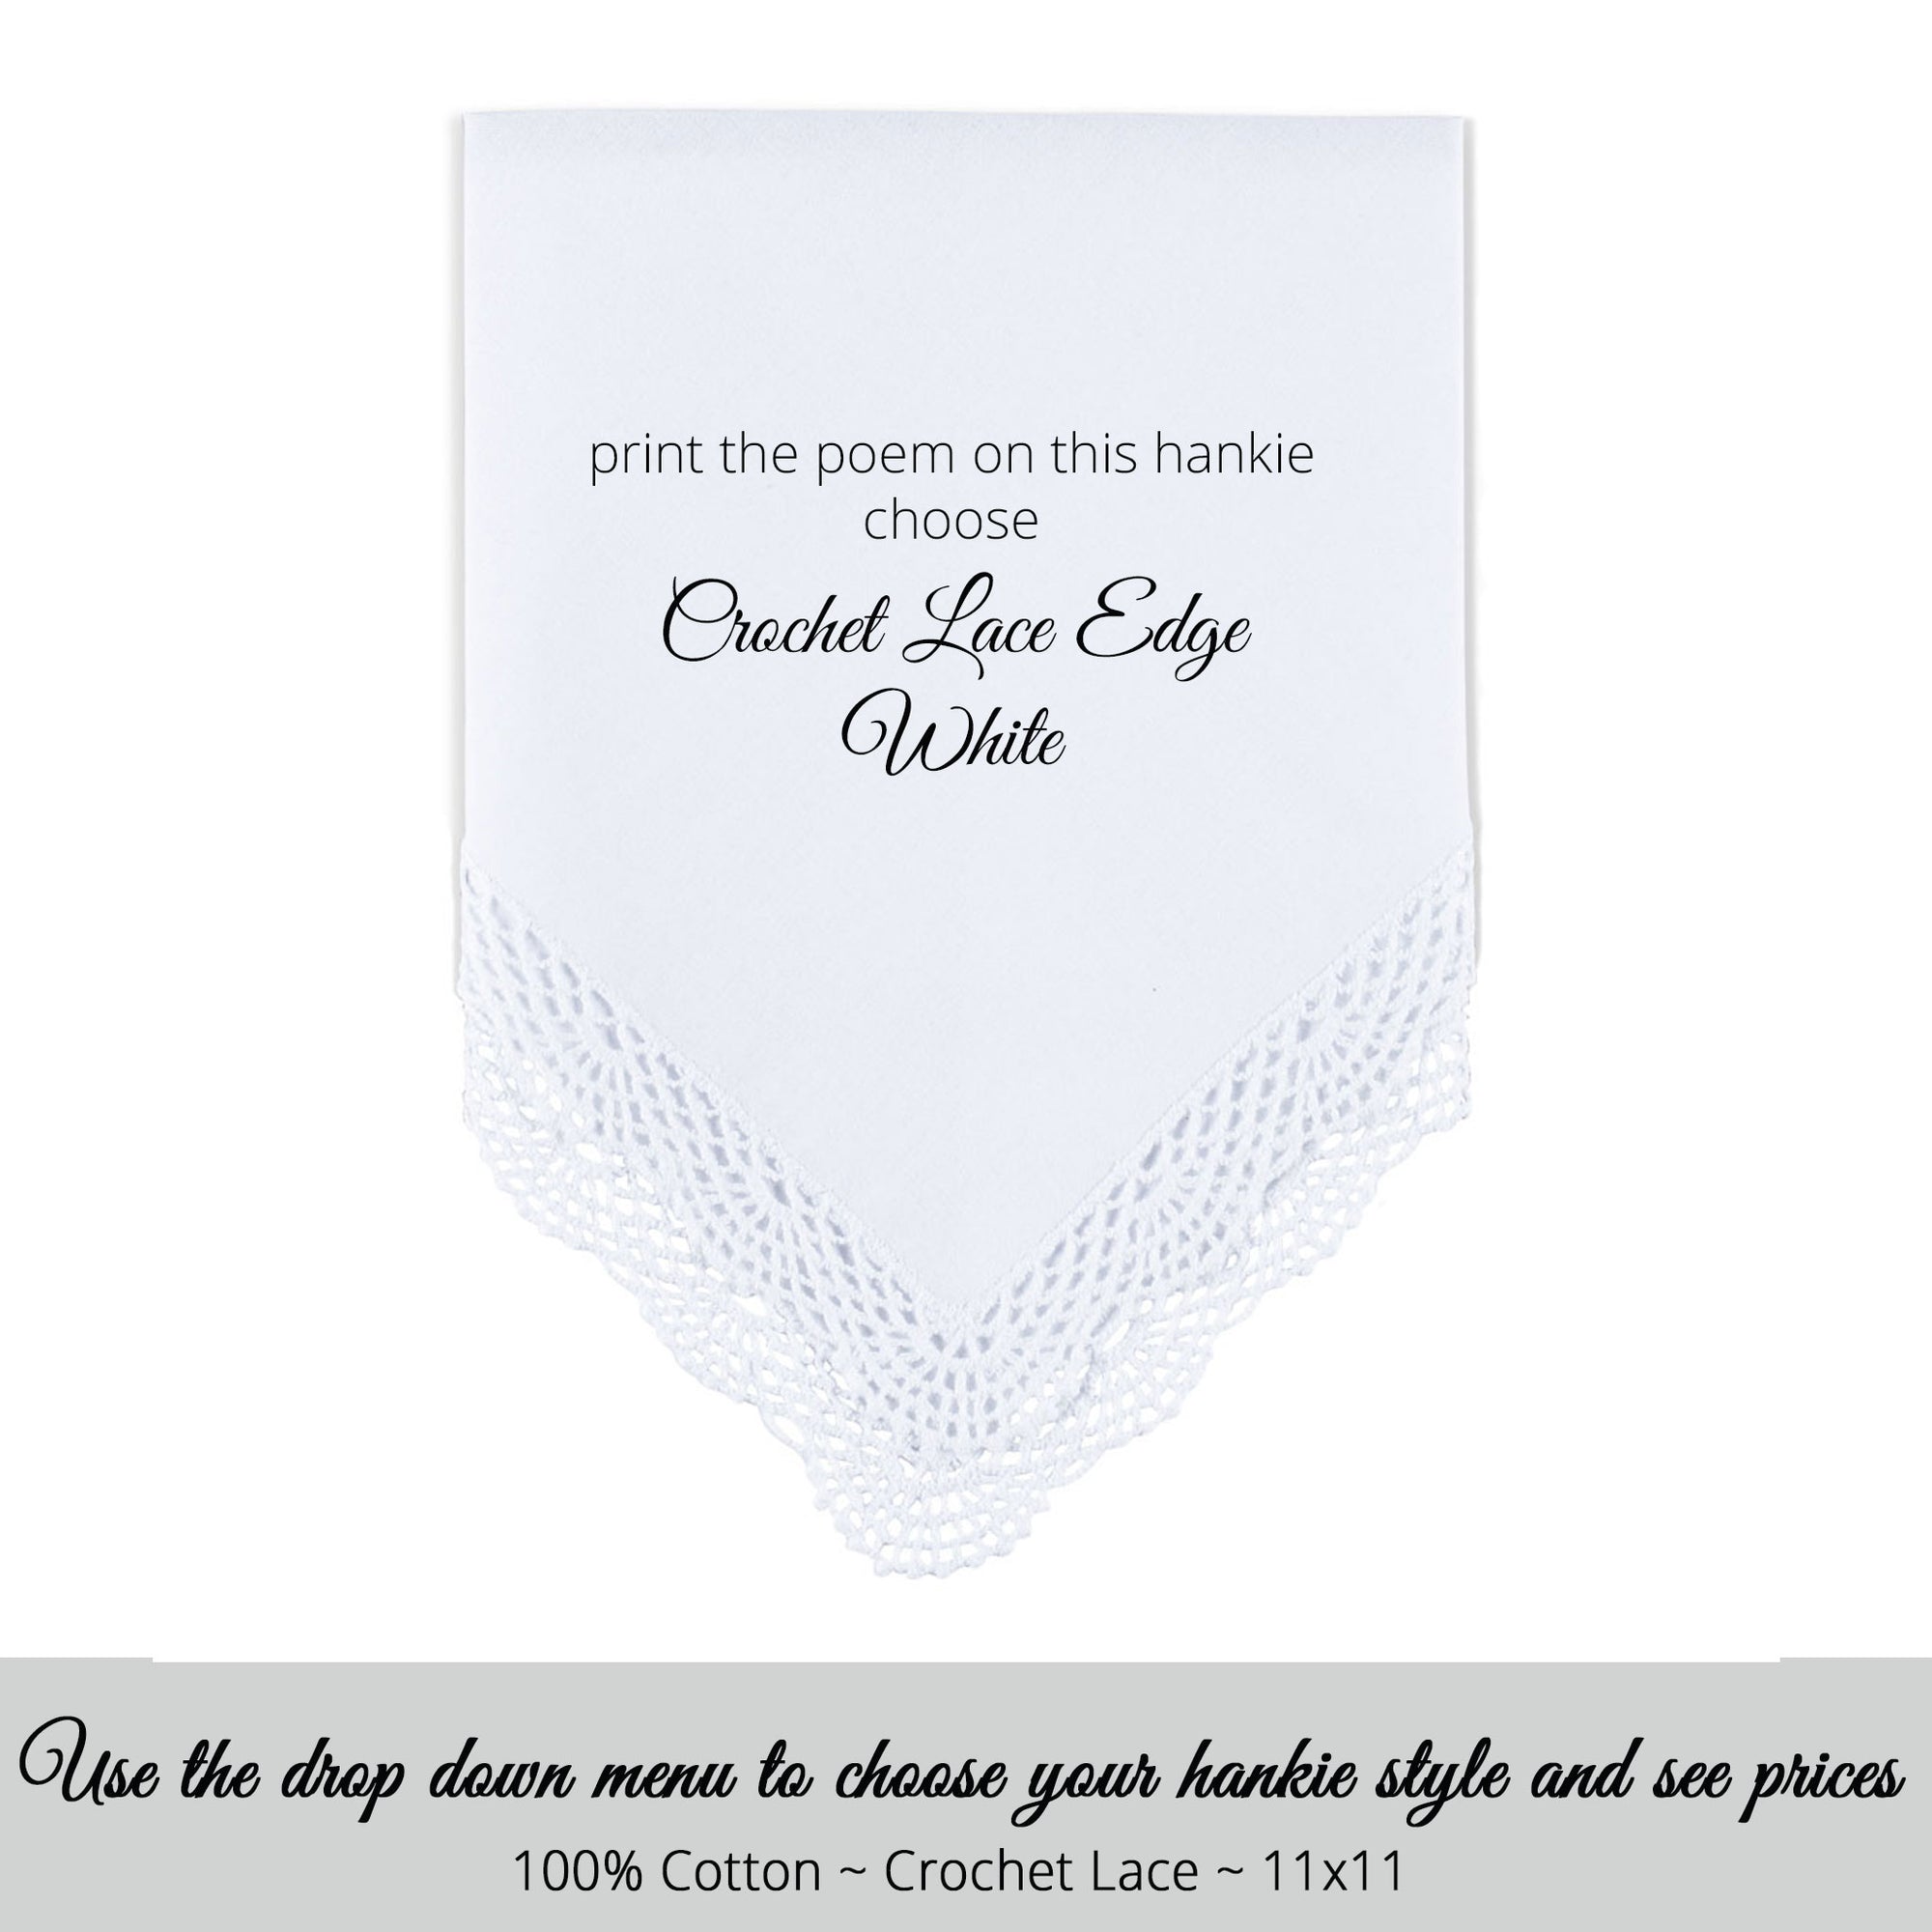 Wedding handkerchief white with crochet lace edge for personalized printed hankie for the bride